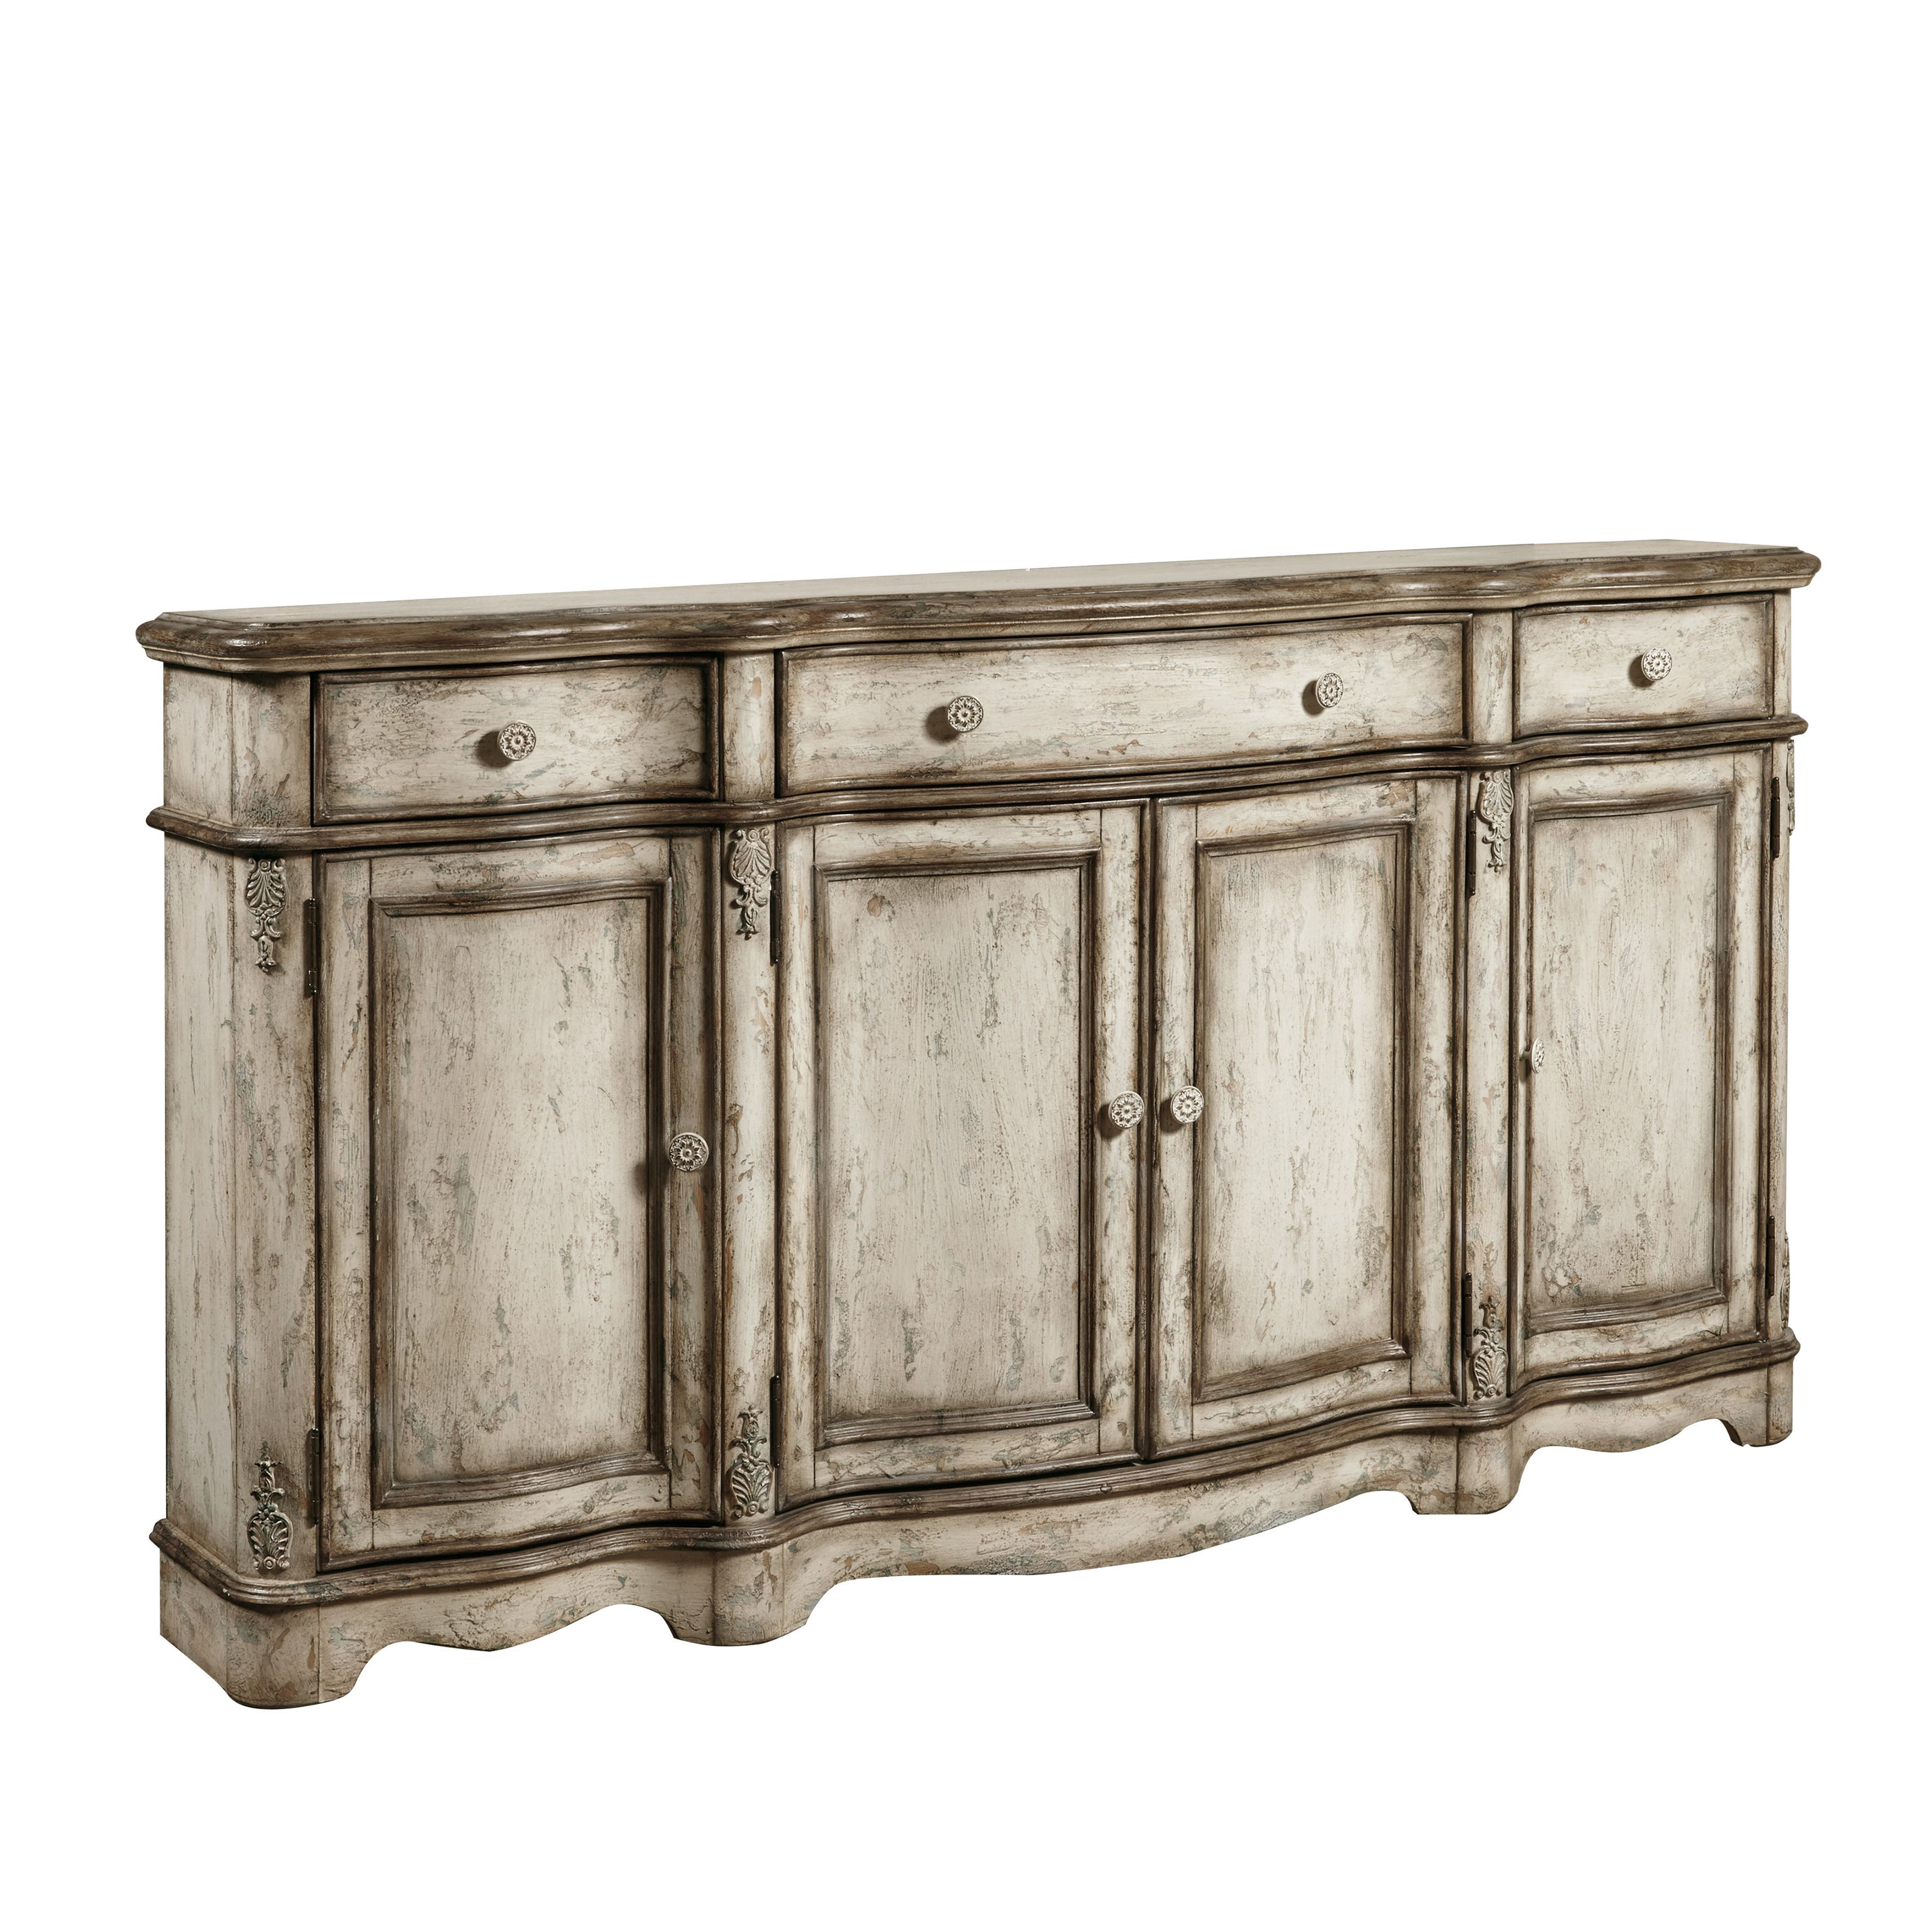 Farmhouse & Rustic Sideboards & Buffets | Birch Lane With Steinhatchee Reclaimed Pine 4 Door Sideboards (View 15 of 20)